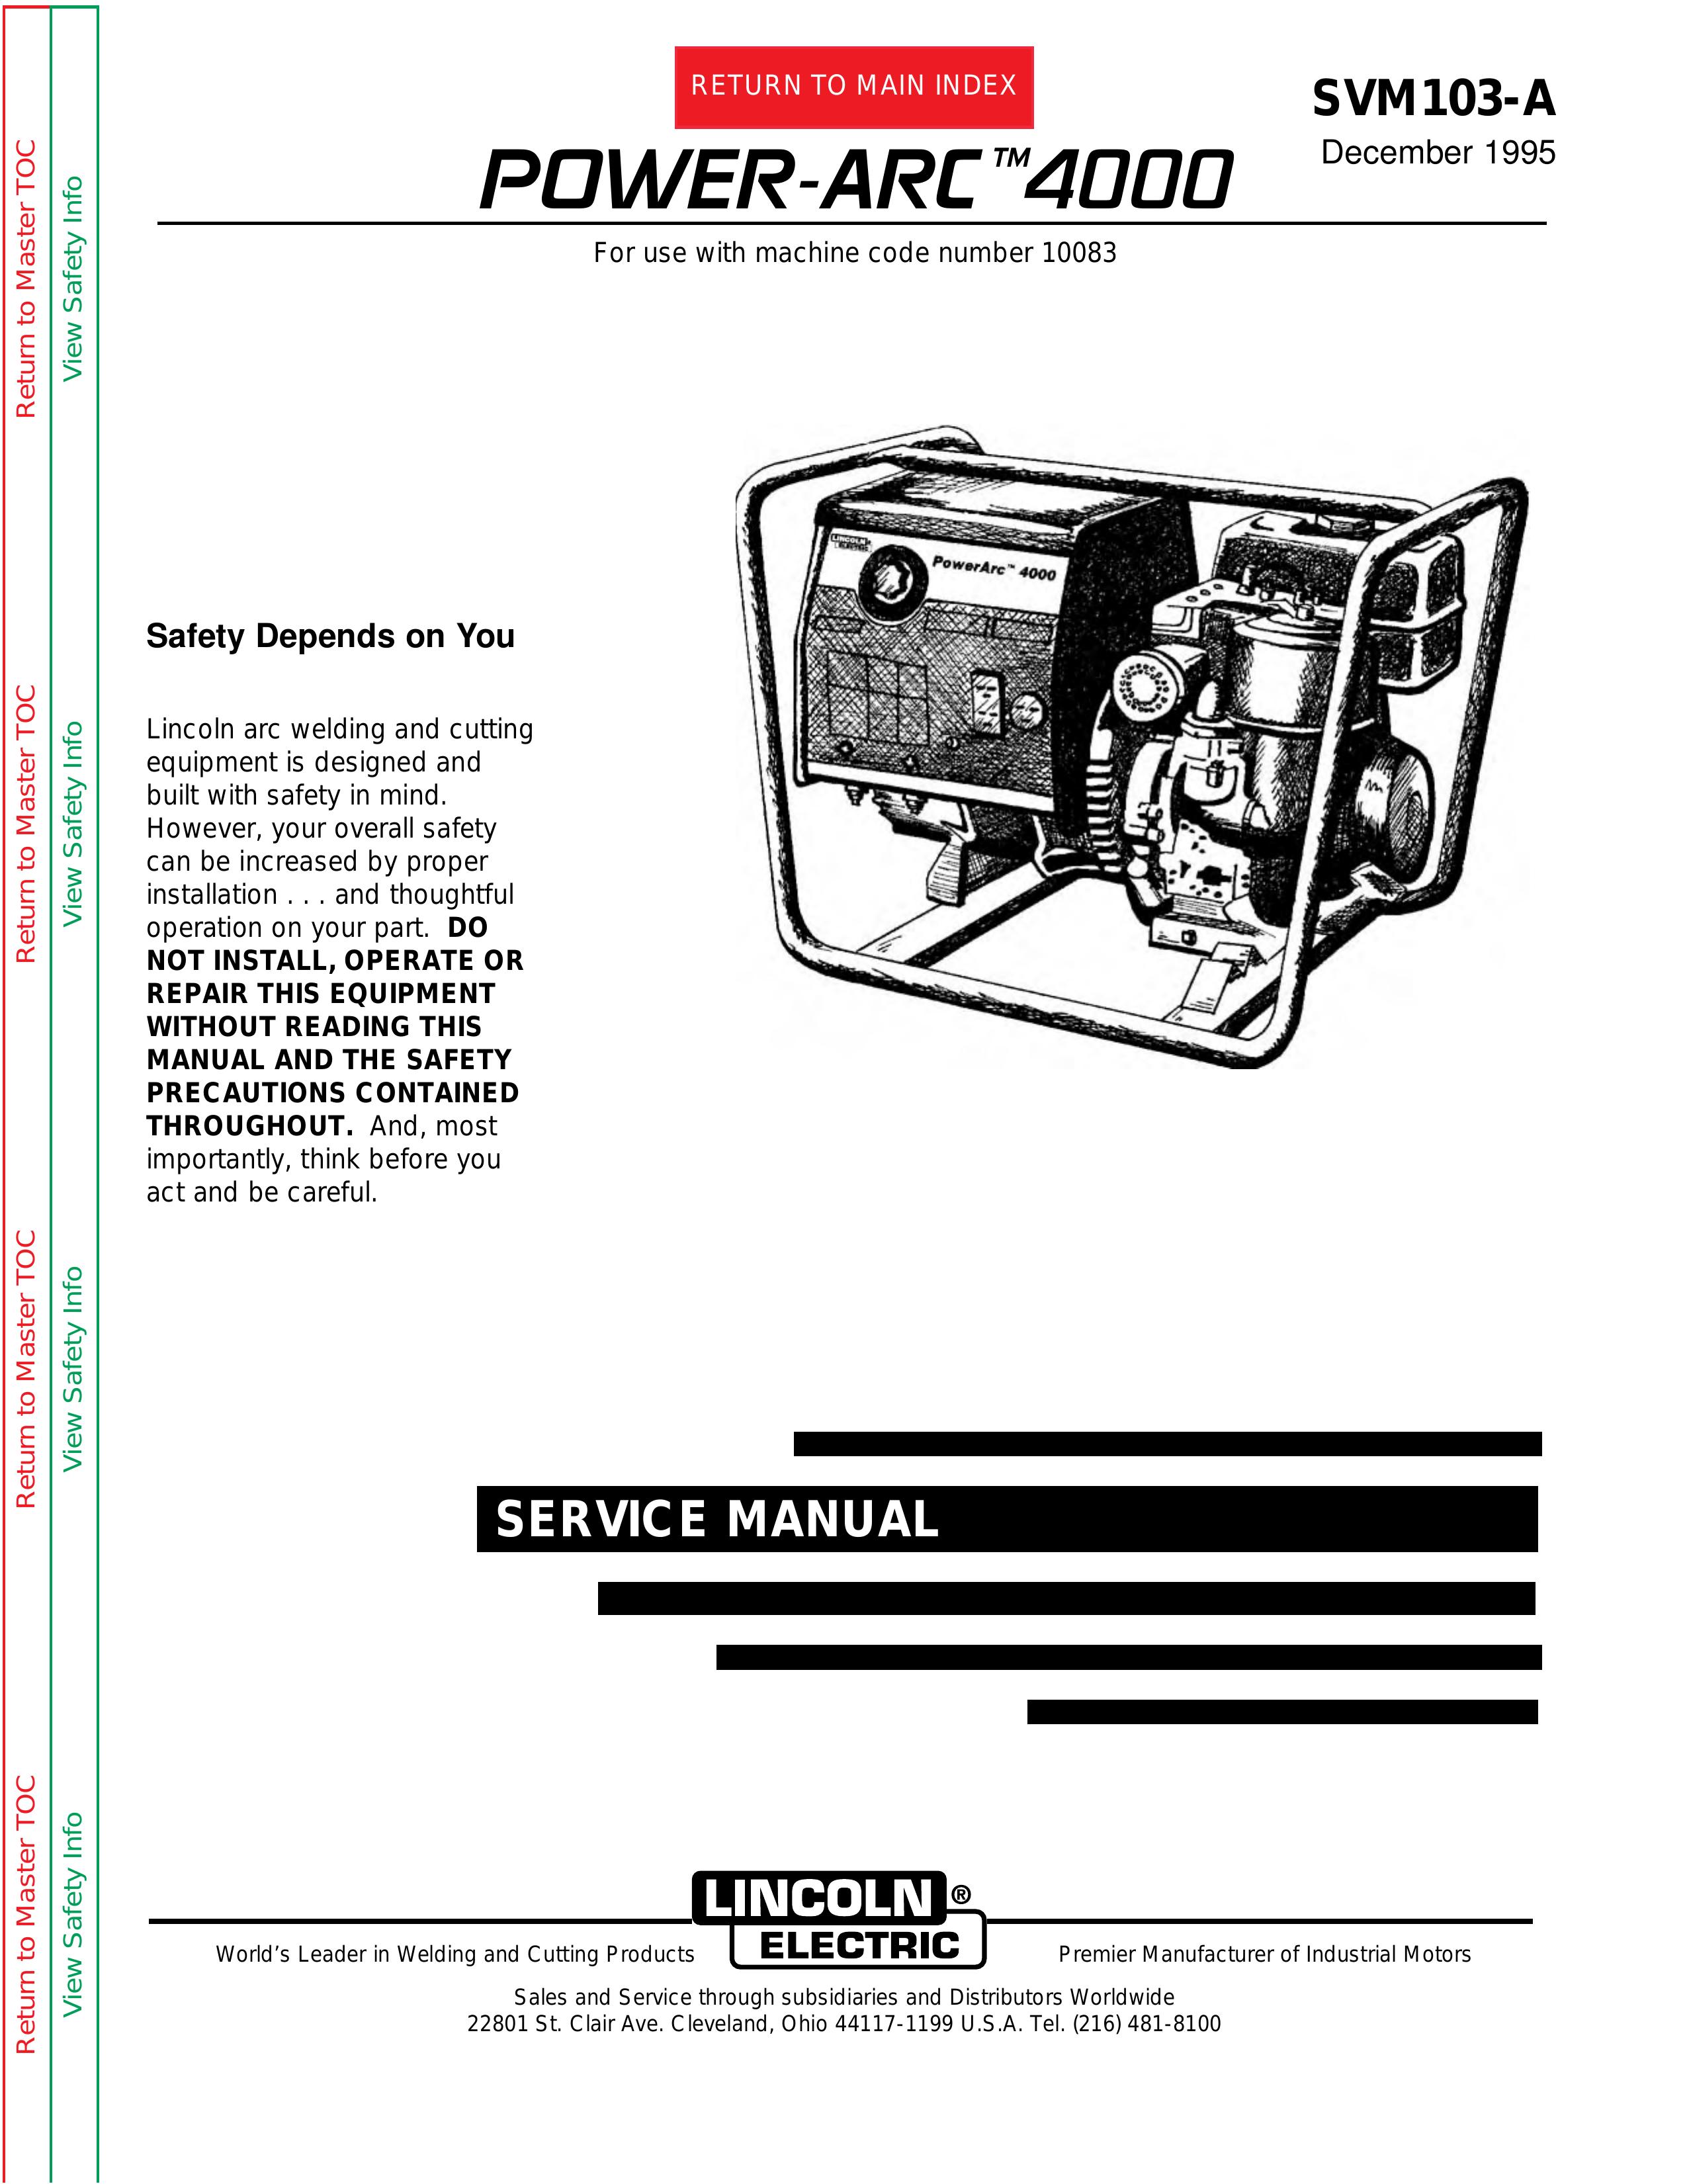 Lincoln Electric SVM103-A Portable Generator User Manual